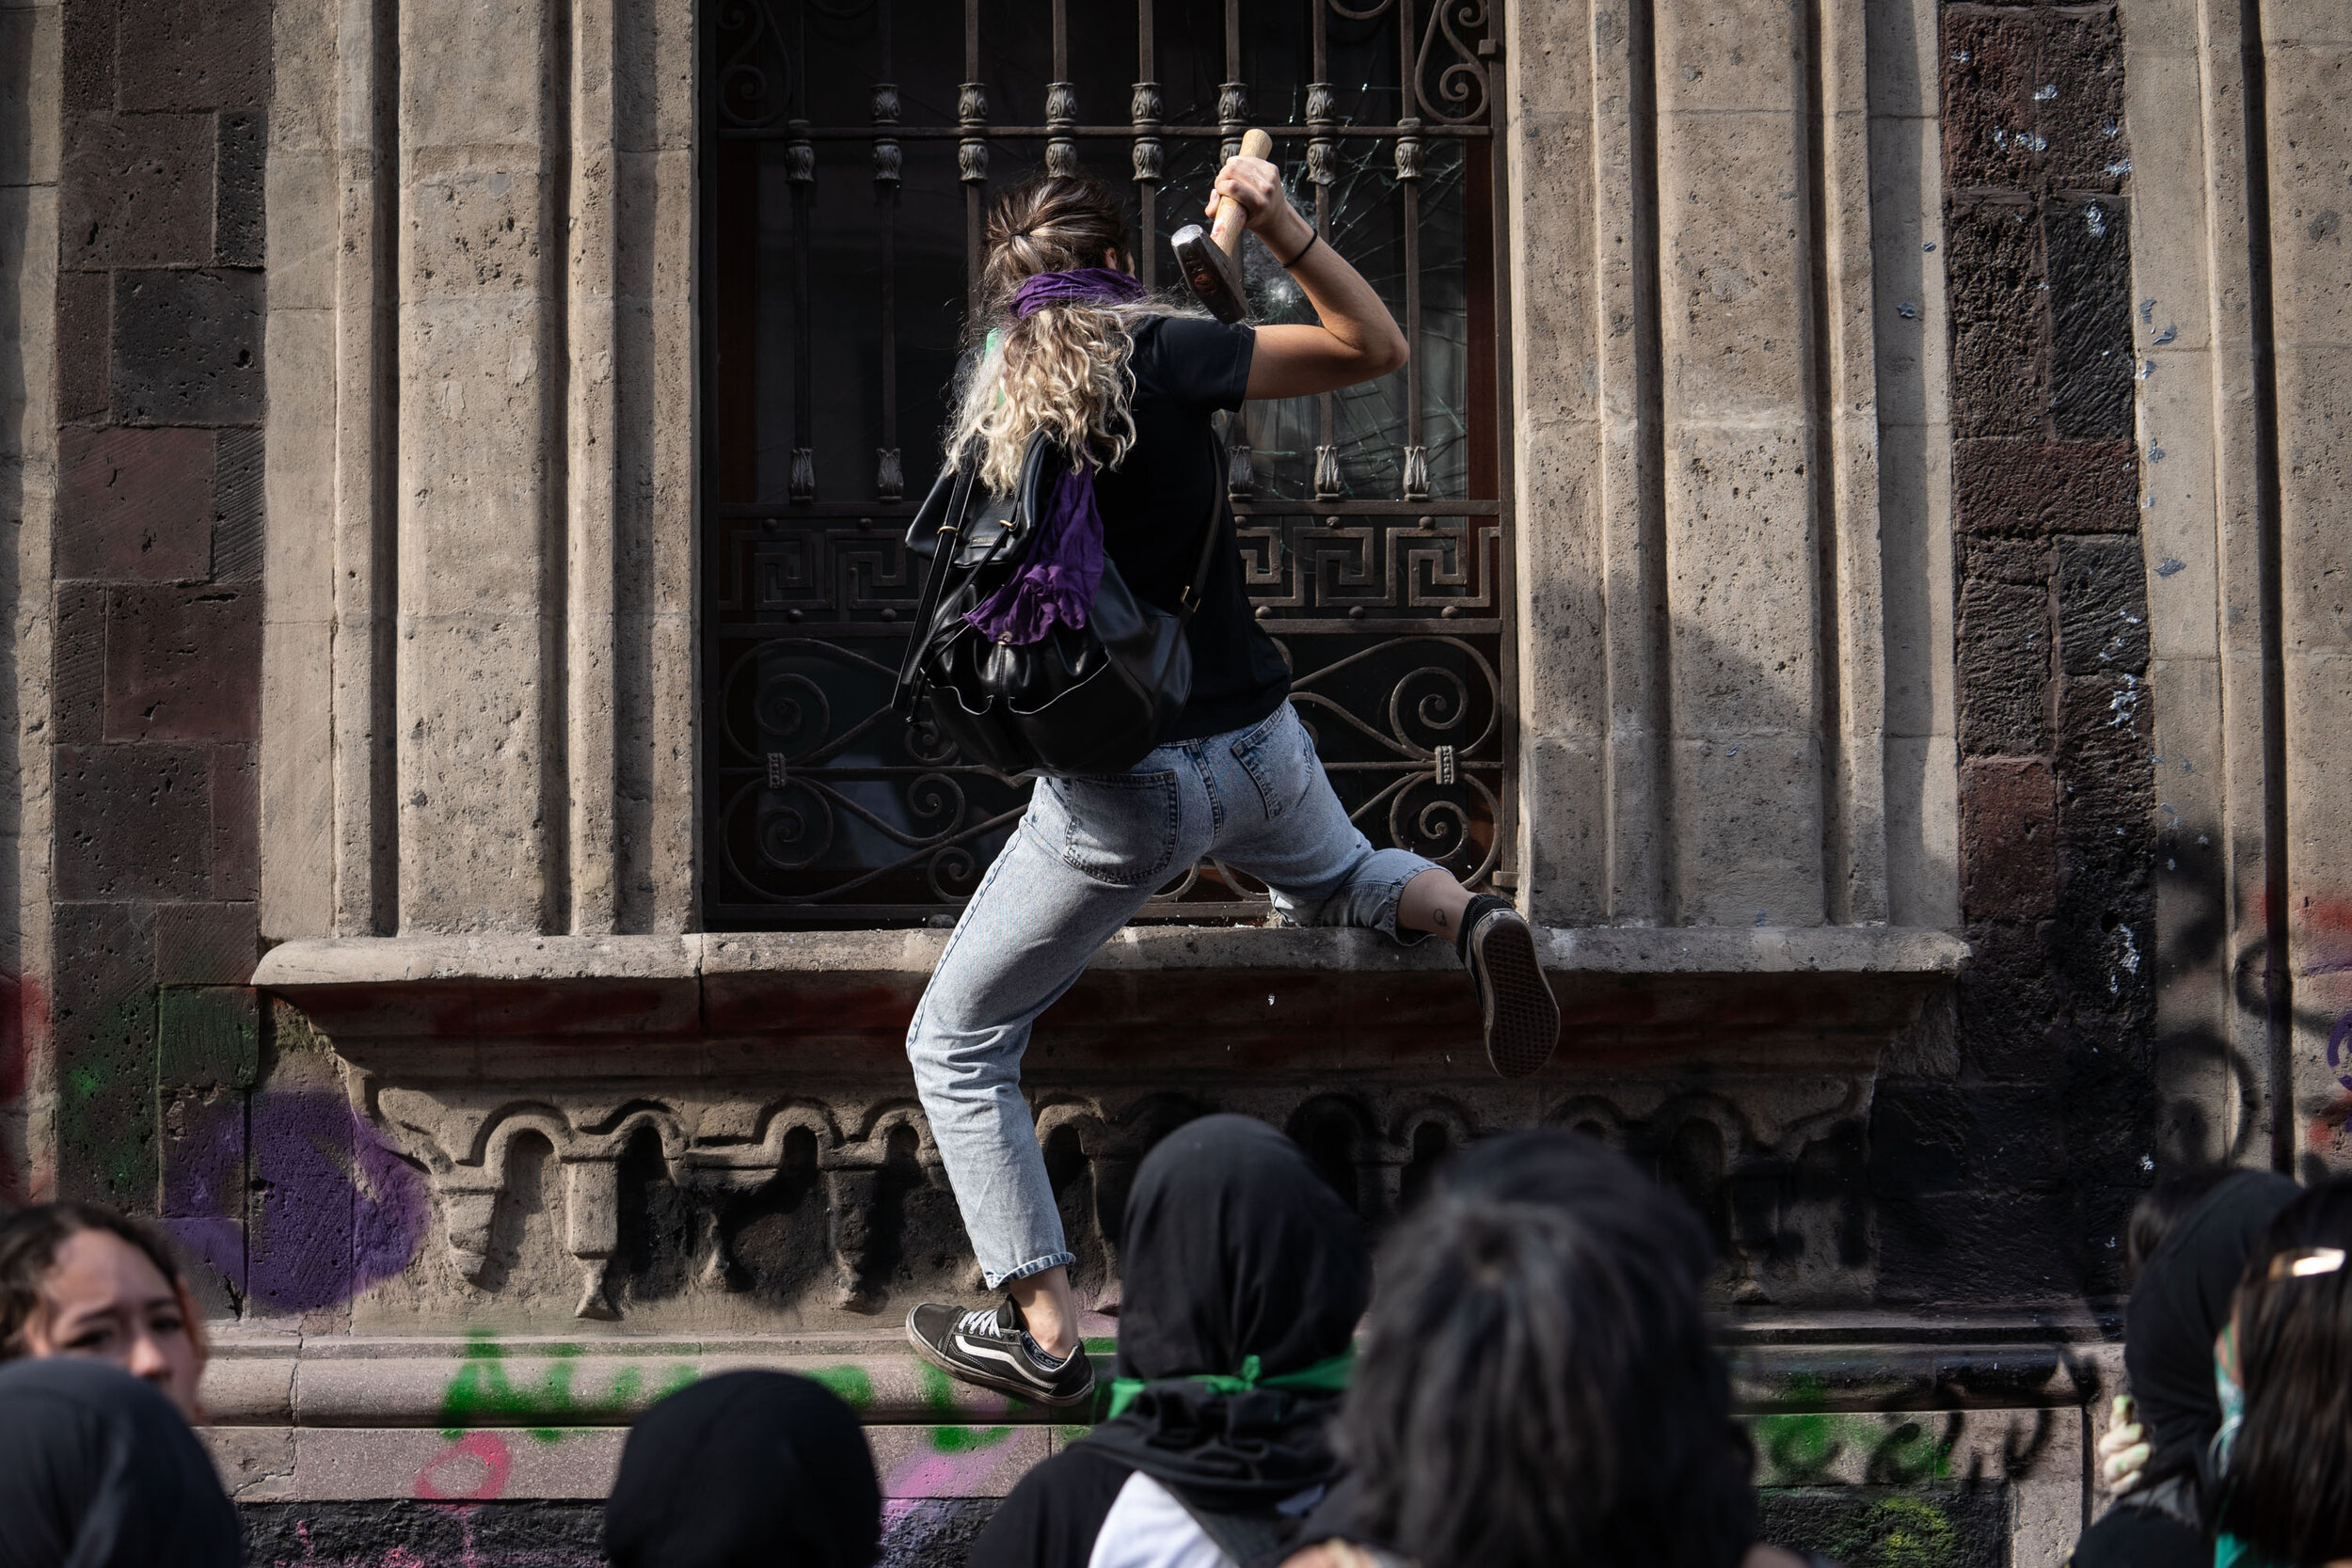   A protester breaks a window during International Women’s day, Mexico City  